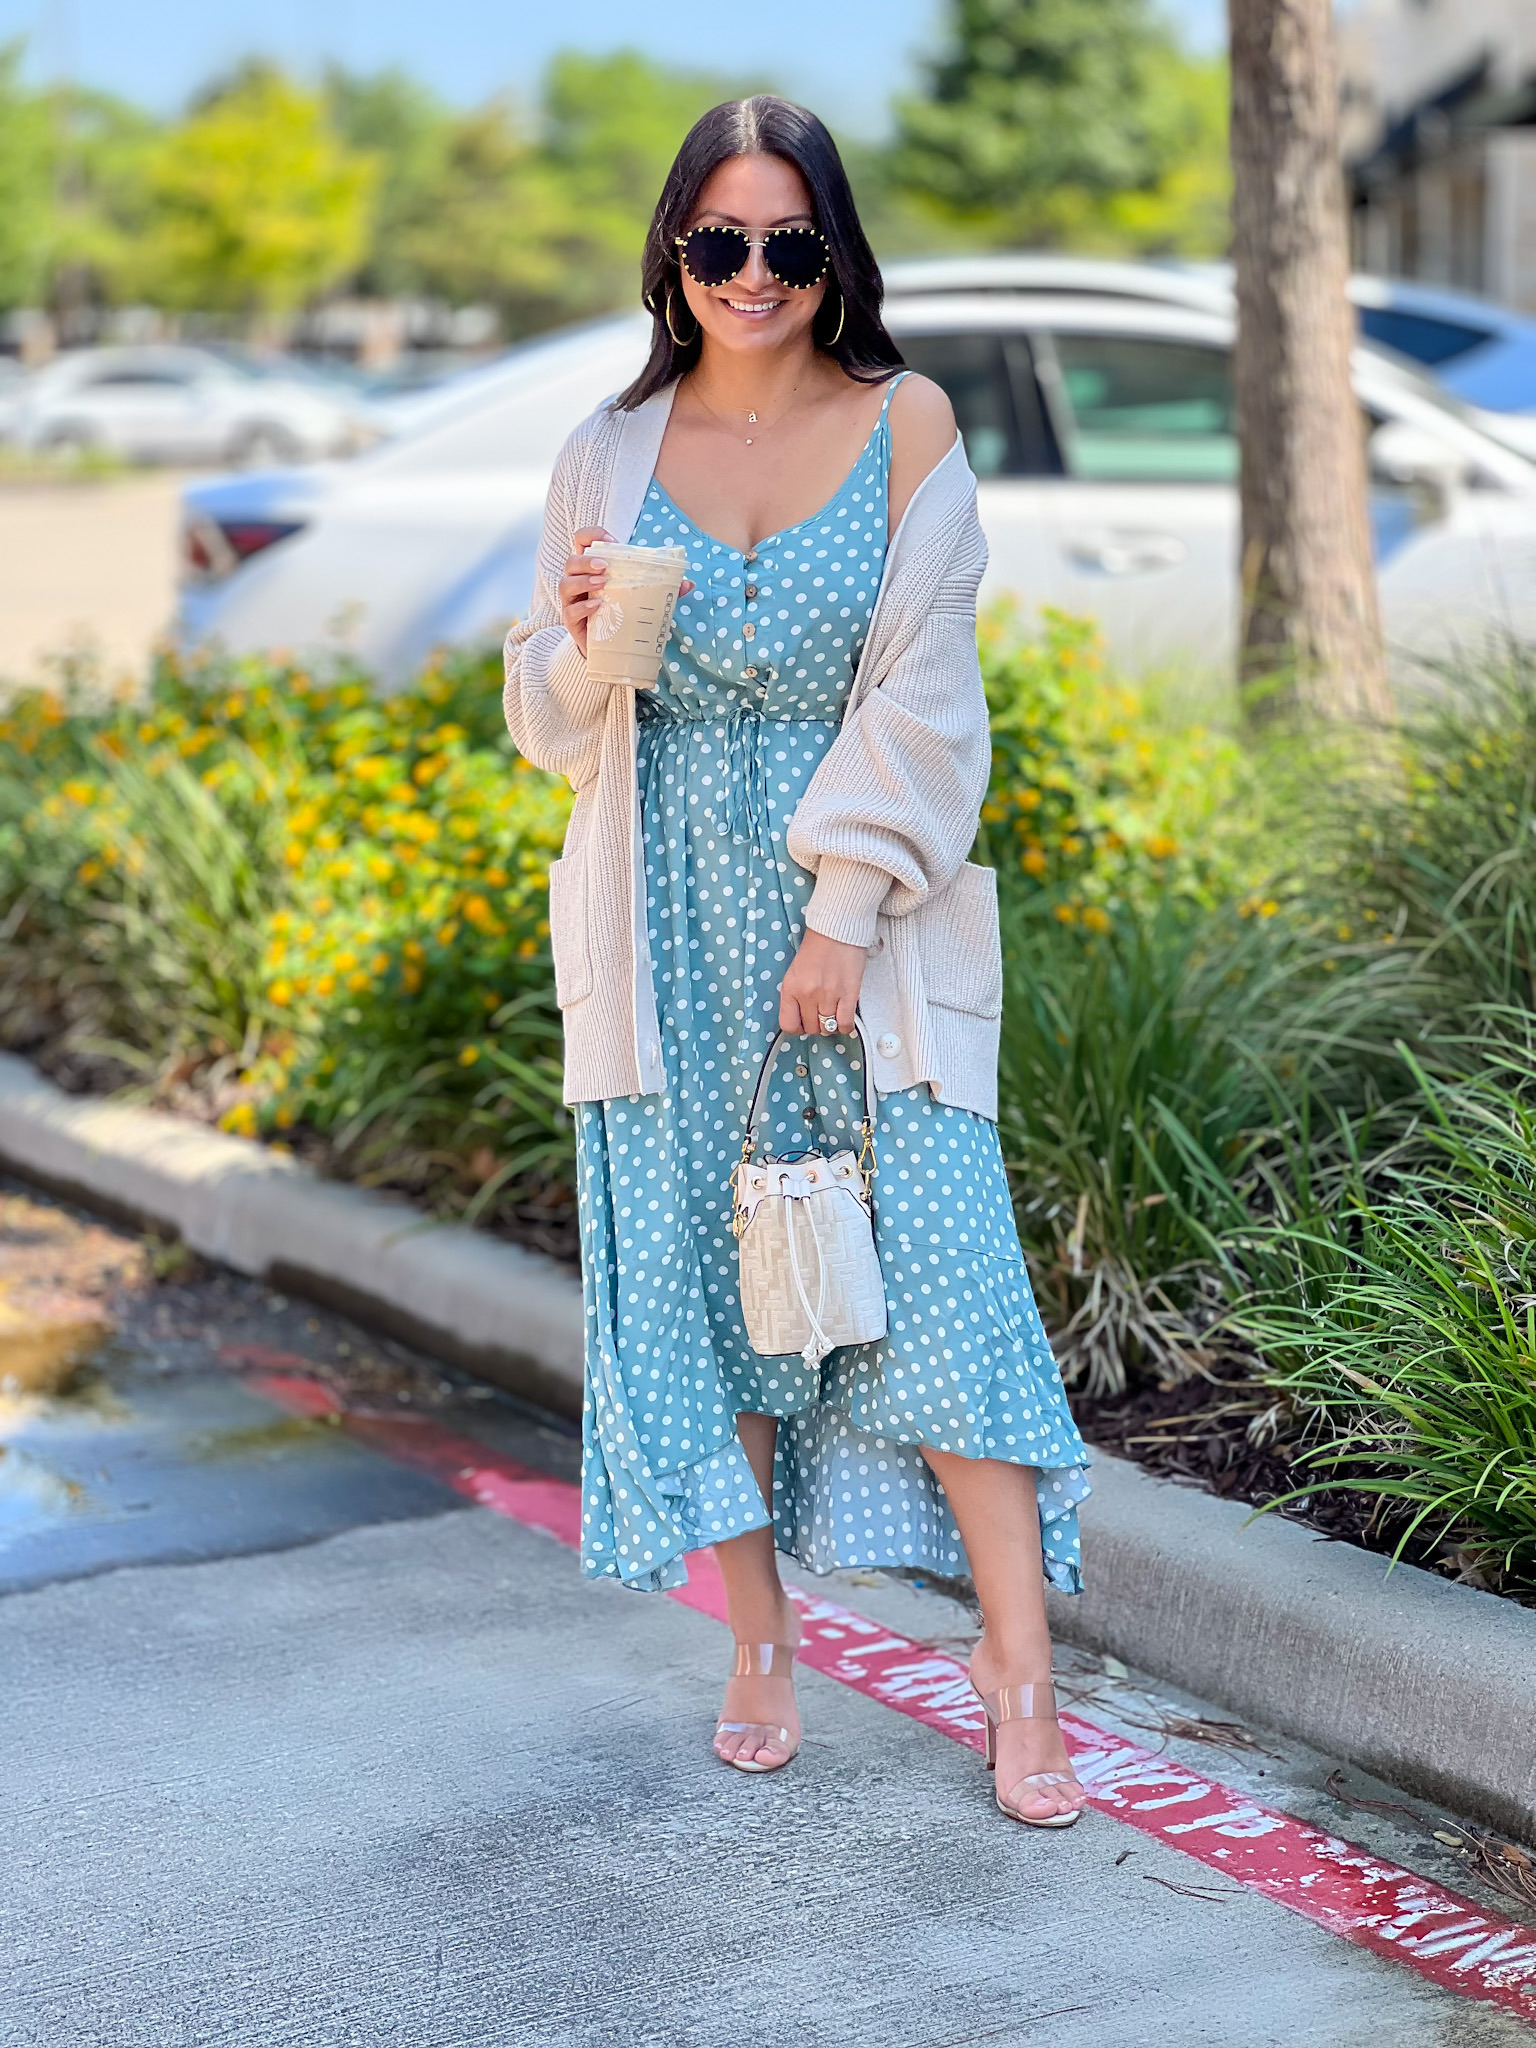 The perfect summer dress from Amazon paired with a cozy cardigan and the best pair of sunnies from Amazon!